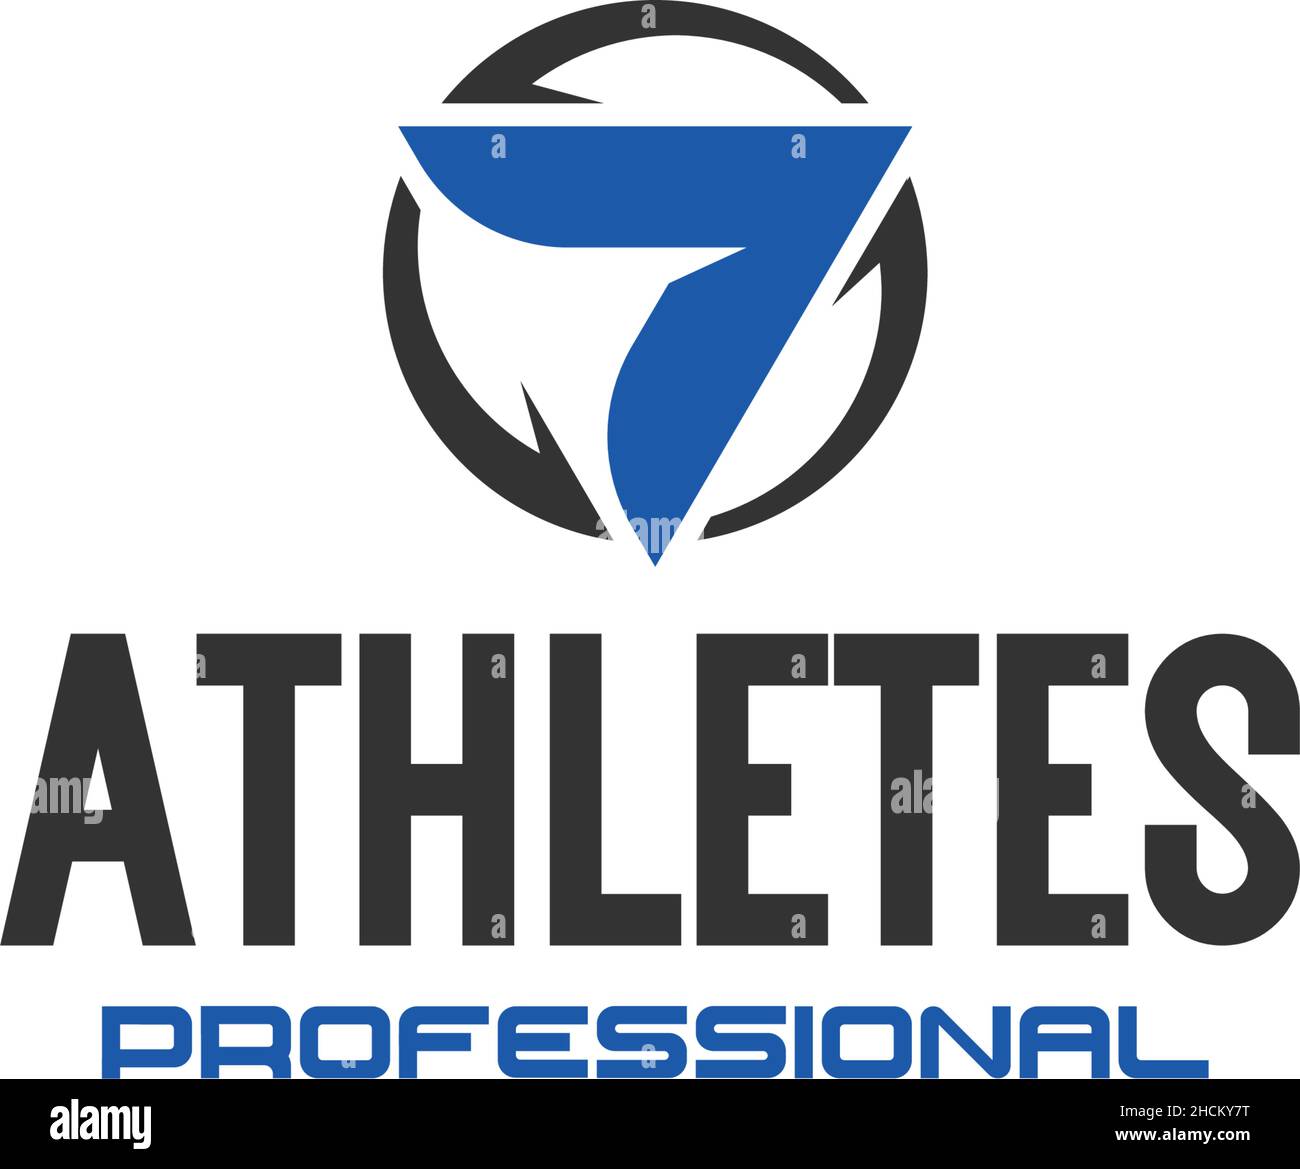 Modern Abstract ATHLETES PROFESSIONAL logo design Stock Vector Image ...